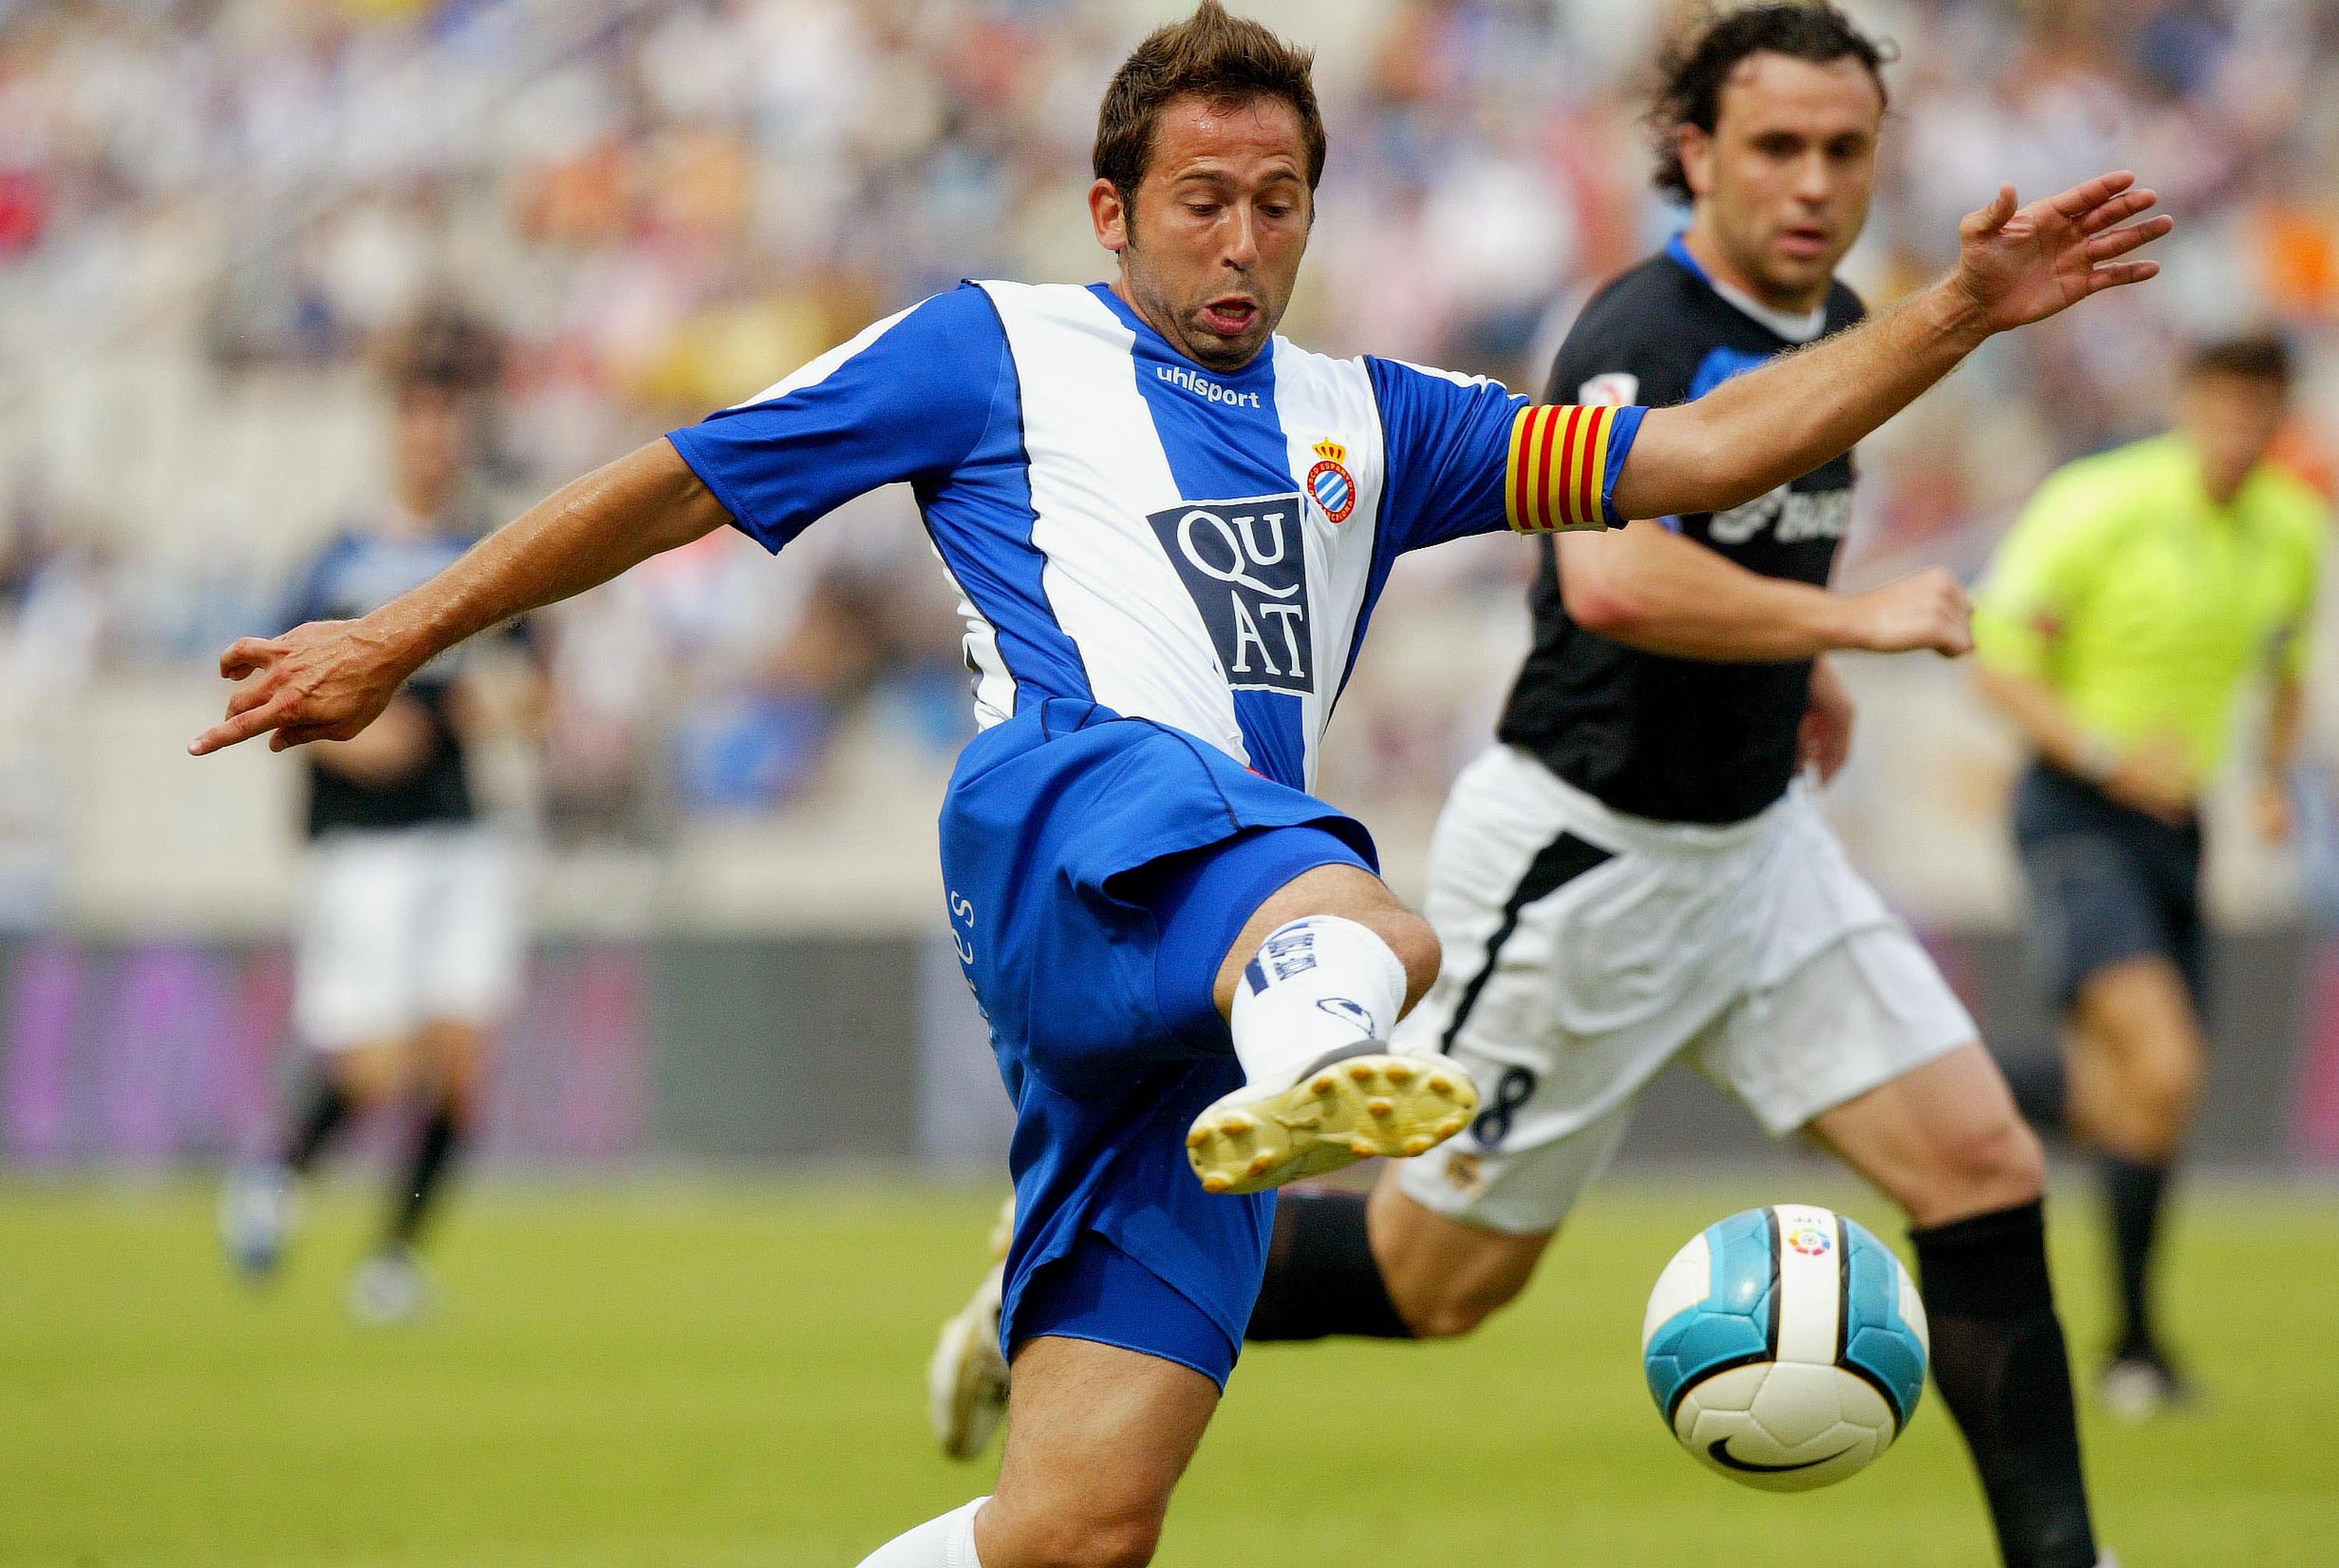 BARCELONA, SPAIN - JUNE 17: Raul Tamudo of Espanyol in action during the La Liga match between Espanyol and Deportivo at the Lluis Companys stadium on June 17, 2007 in Barcelona, Spain. (Photo by Bagu Blanco/Getty Images).